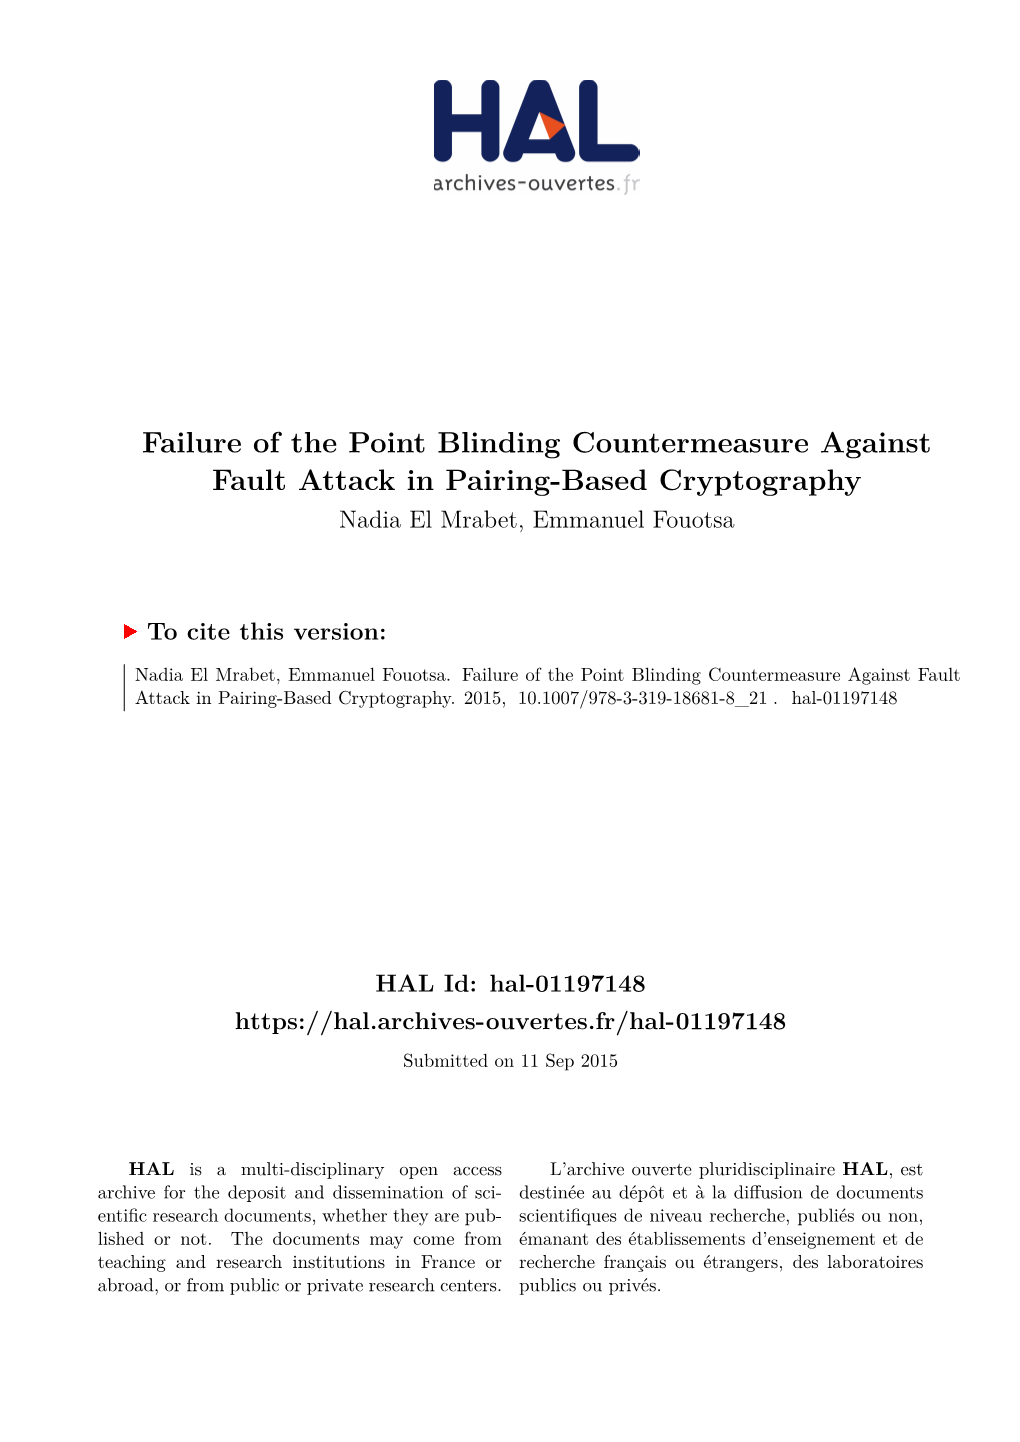 Failure of the Point Blinding Countermeasure Against Fault Attack in Pairing-Based Cryptography Nadia El Mrabet, Emmanuel Fouotsa